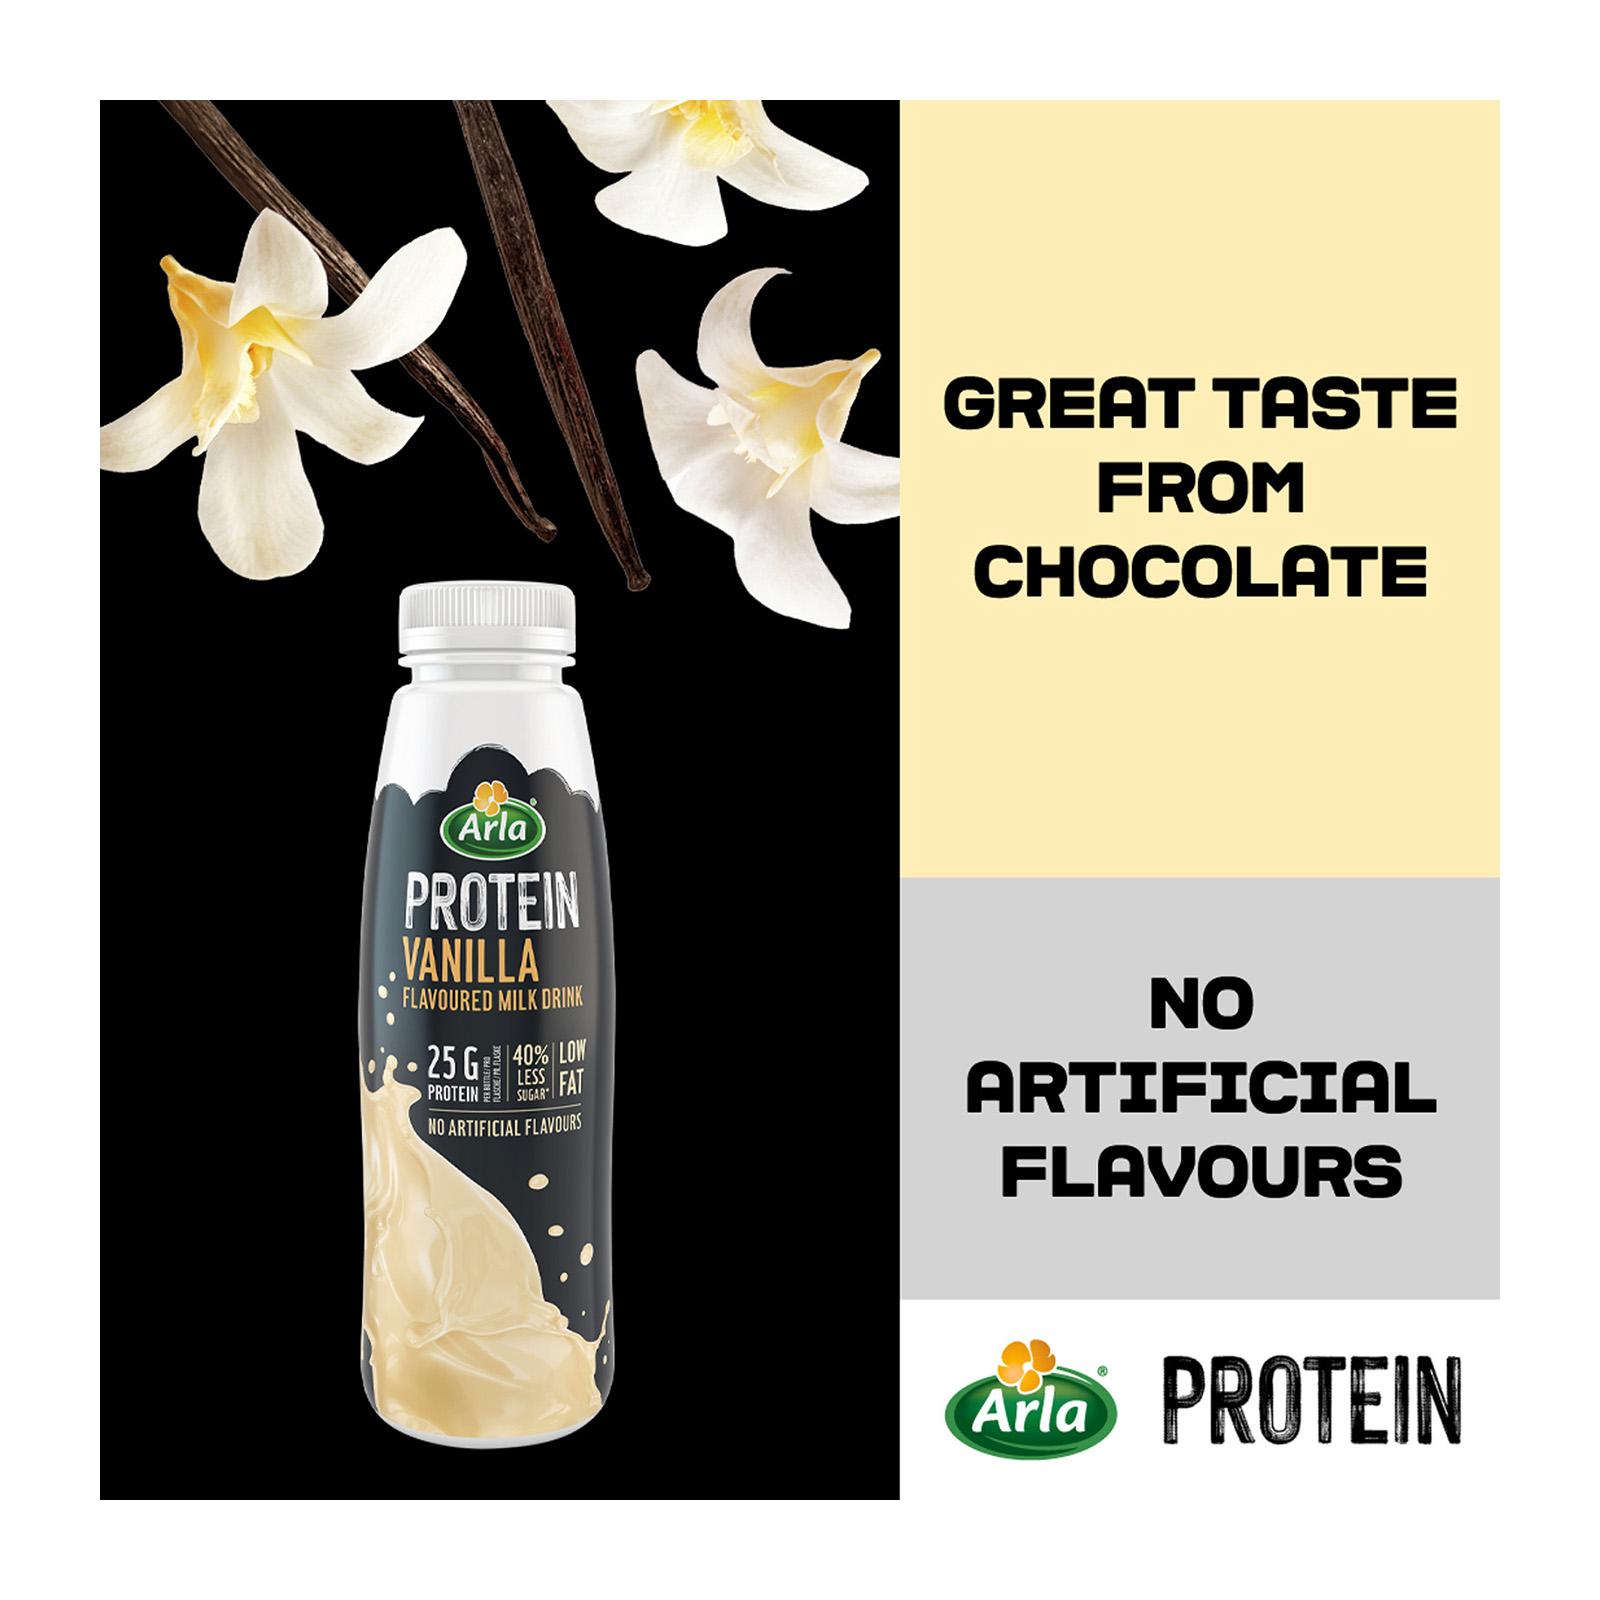 Batido Protein Vainilla less sugar *Sin Lactosa 500g  Arla Foods dairy  product provides you with natural godness all day every day